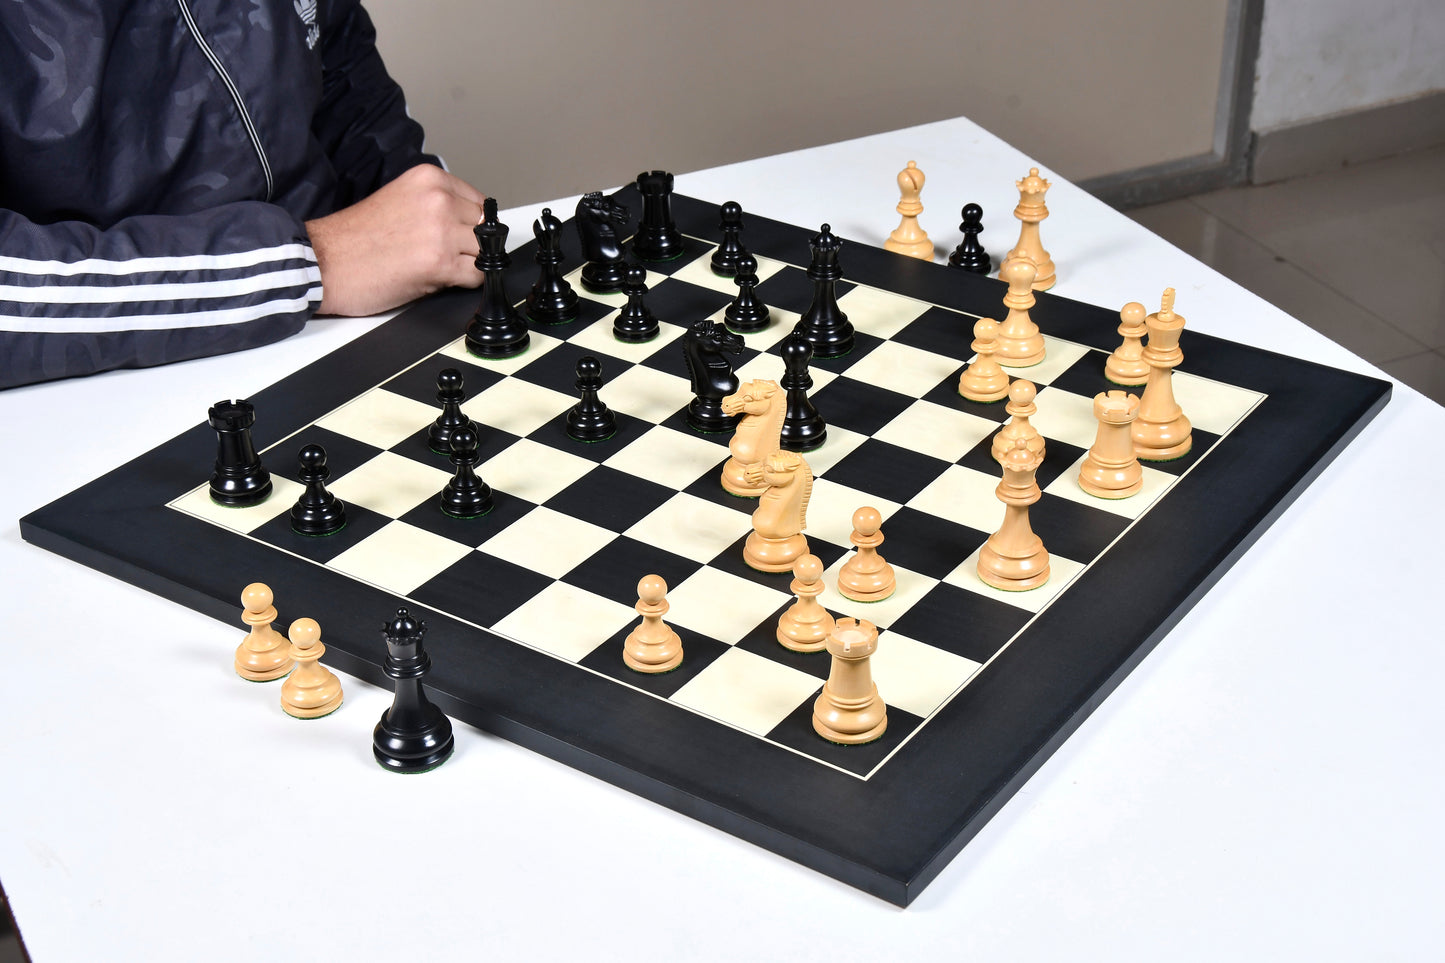 The British Chess Company (BCC) Reproduced Staunton Double Collared Chess Pieces in Ebony & Box Wood - 4.2" King